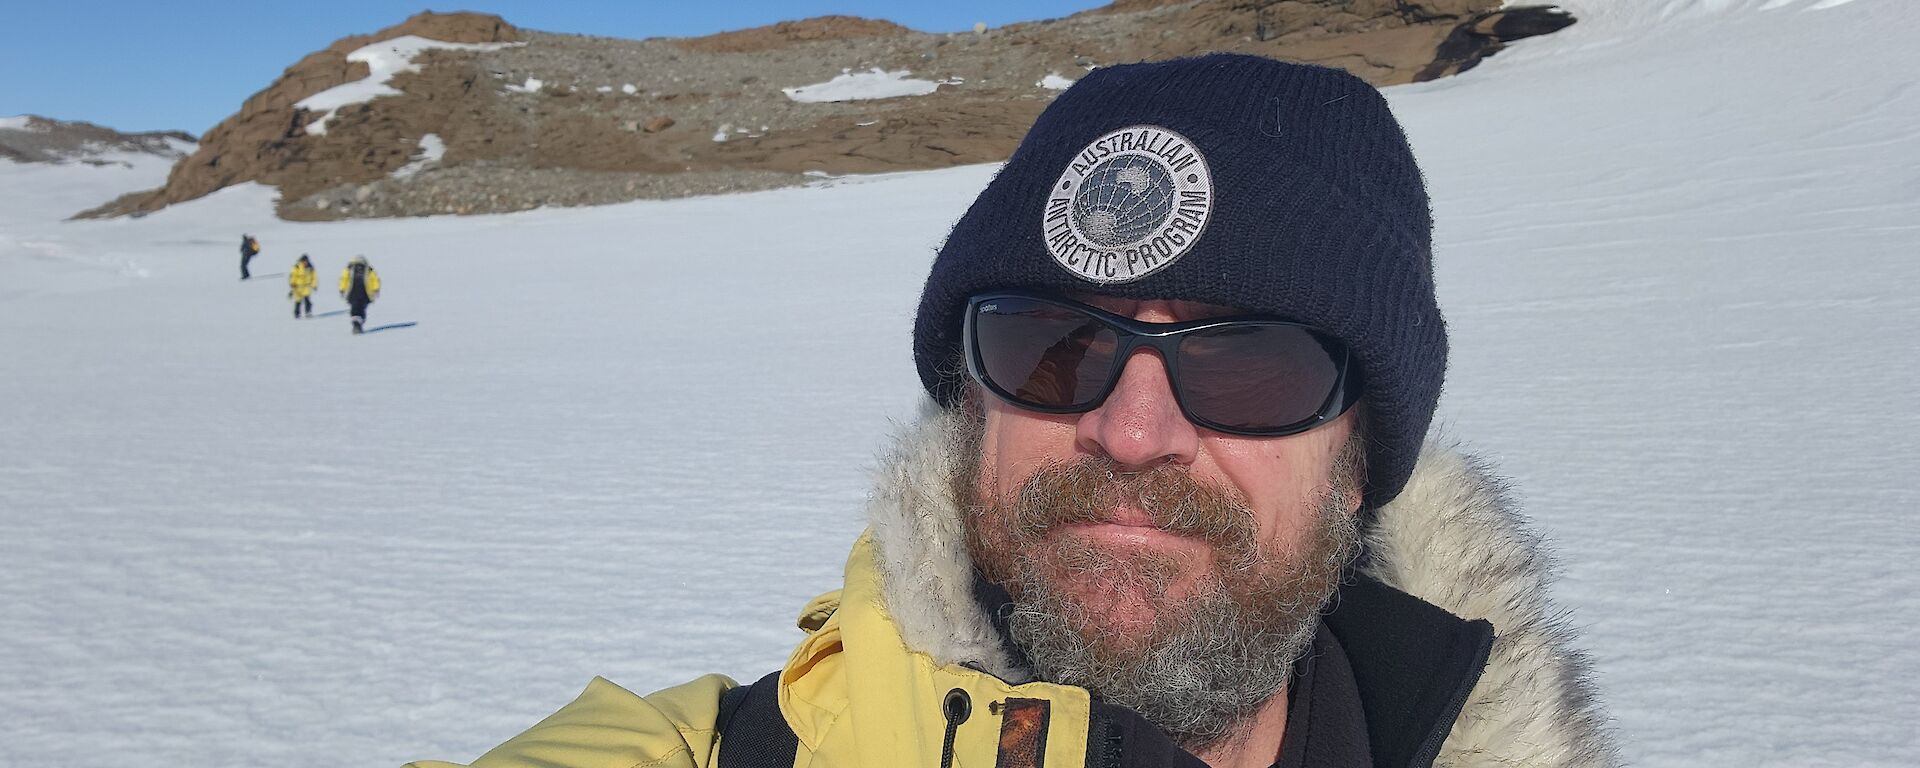 A man with a beard and wearing sunglasses is taking selfie with a snow covered ground behind him.